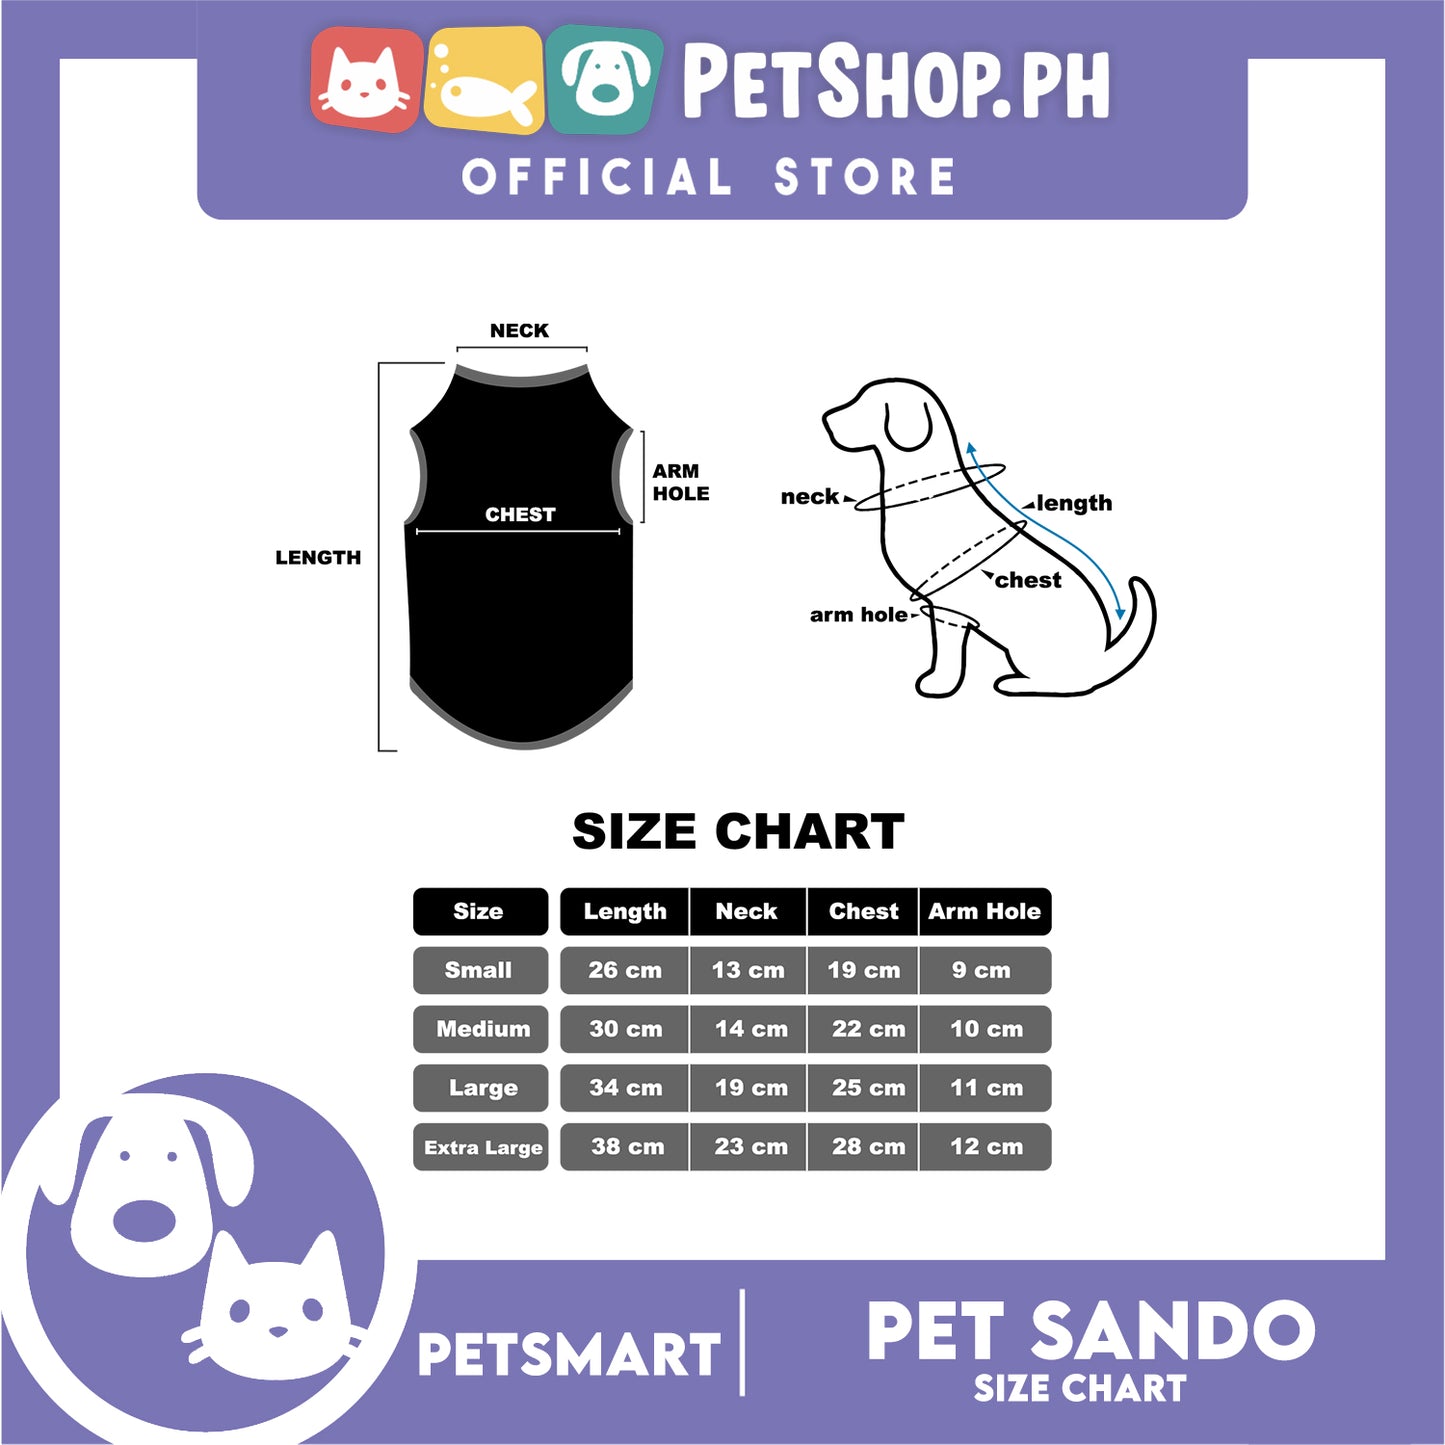 Pet Sando Character Design, Green with Red Piping Color, XL Size (DG-CTN199XL)